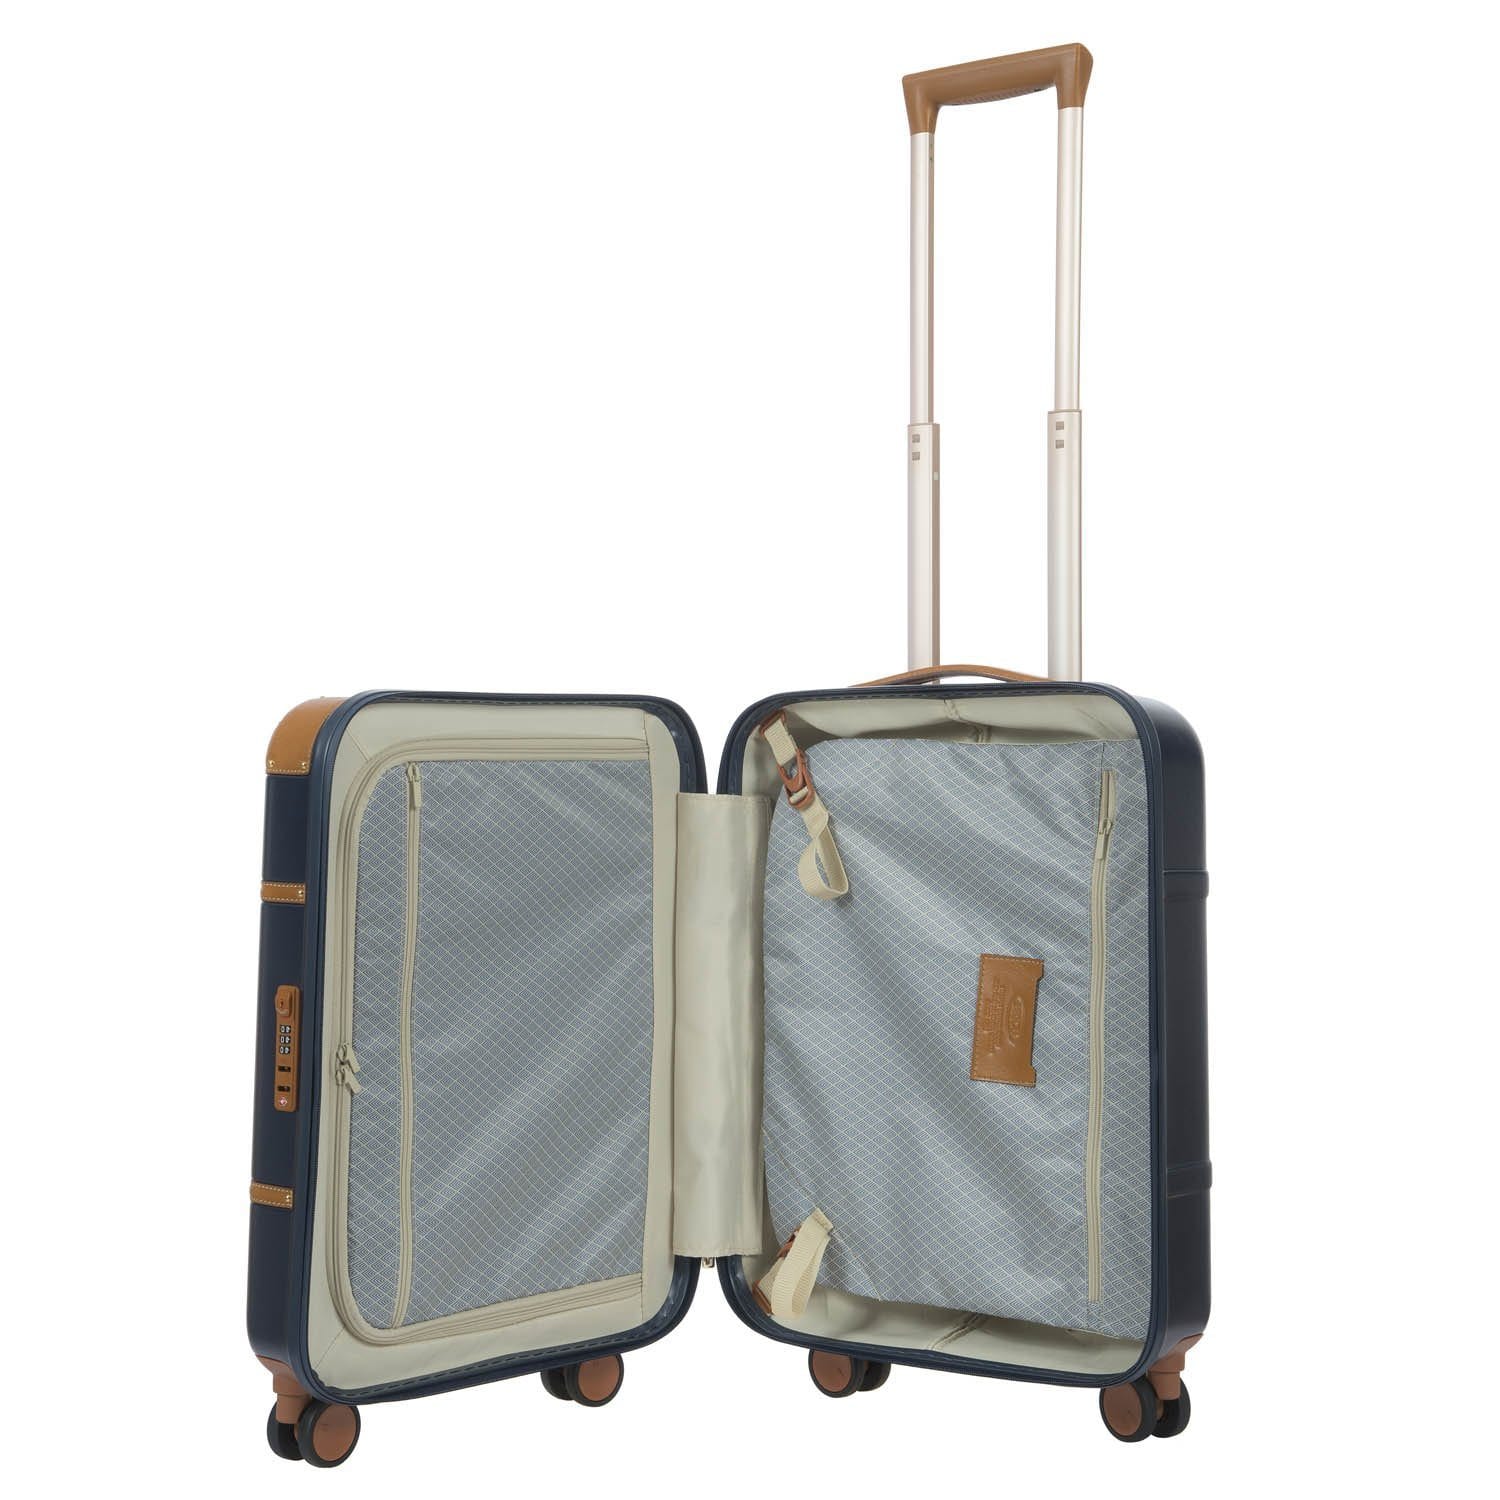 BELLAGIO V2.0 760MM SPINNER TRUNK Check-In Luggage Bric&